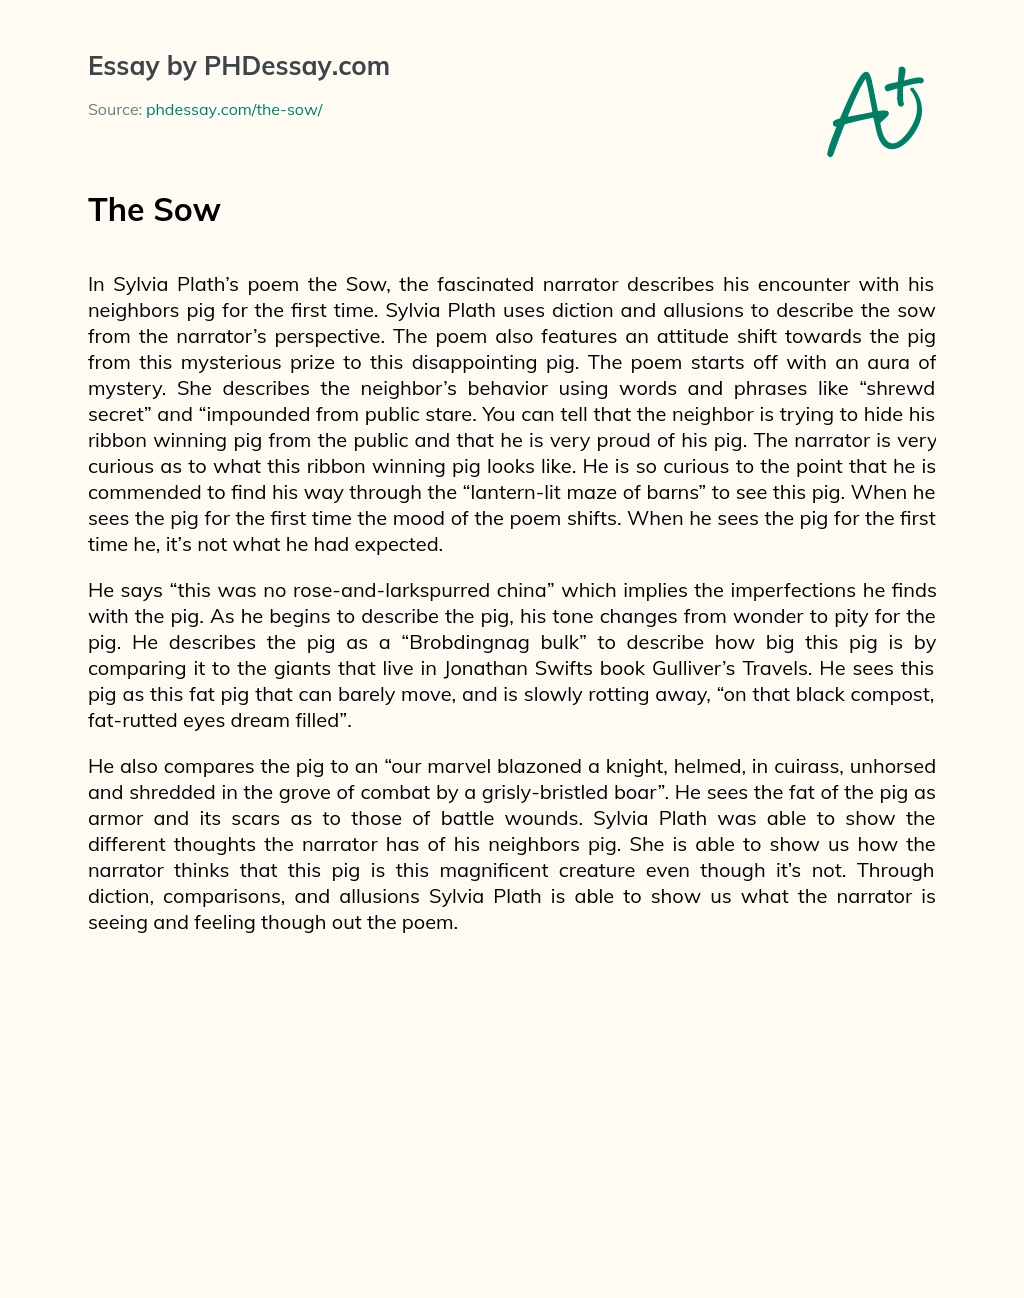 The Sow essay